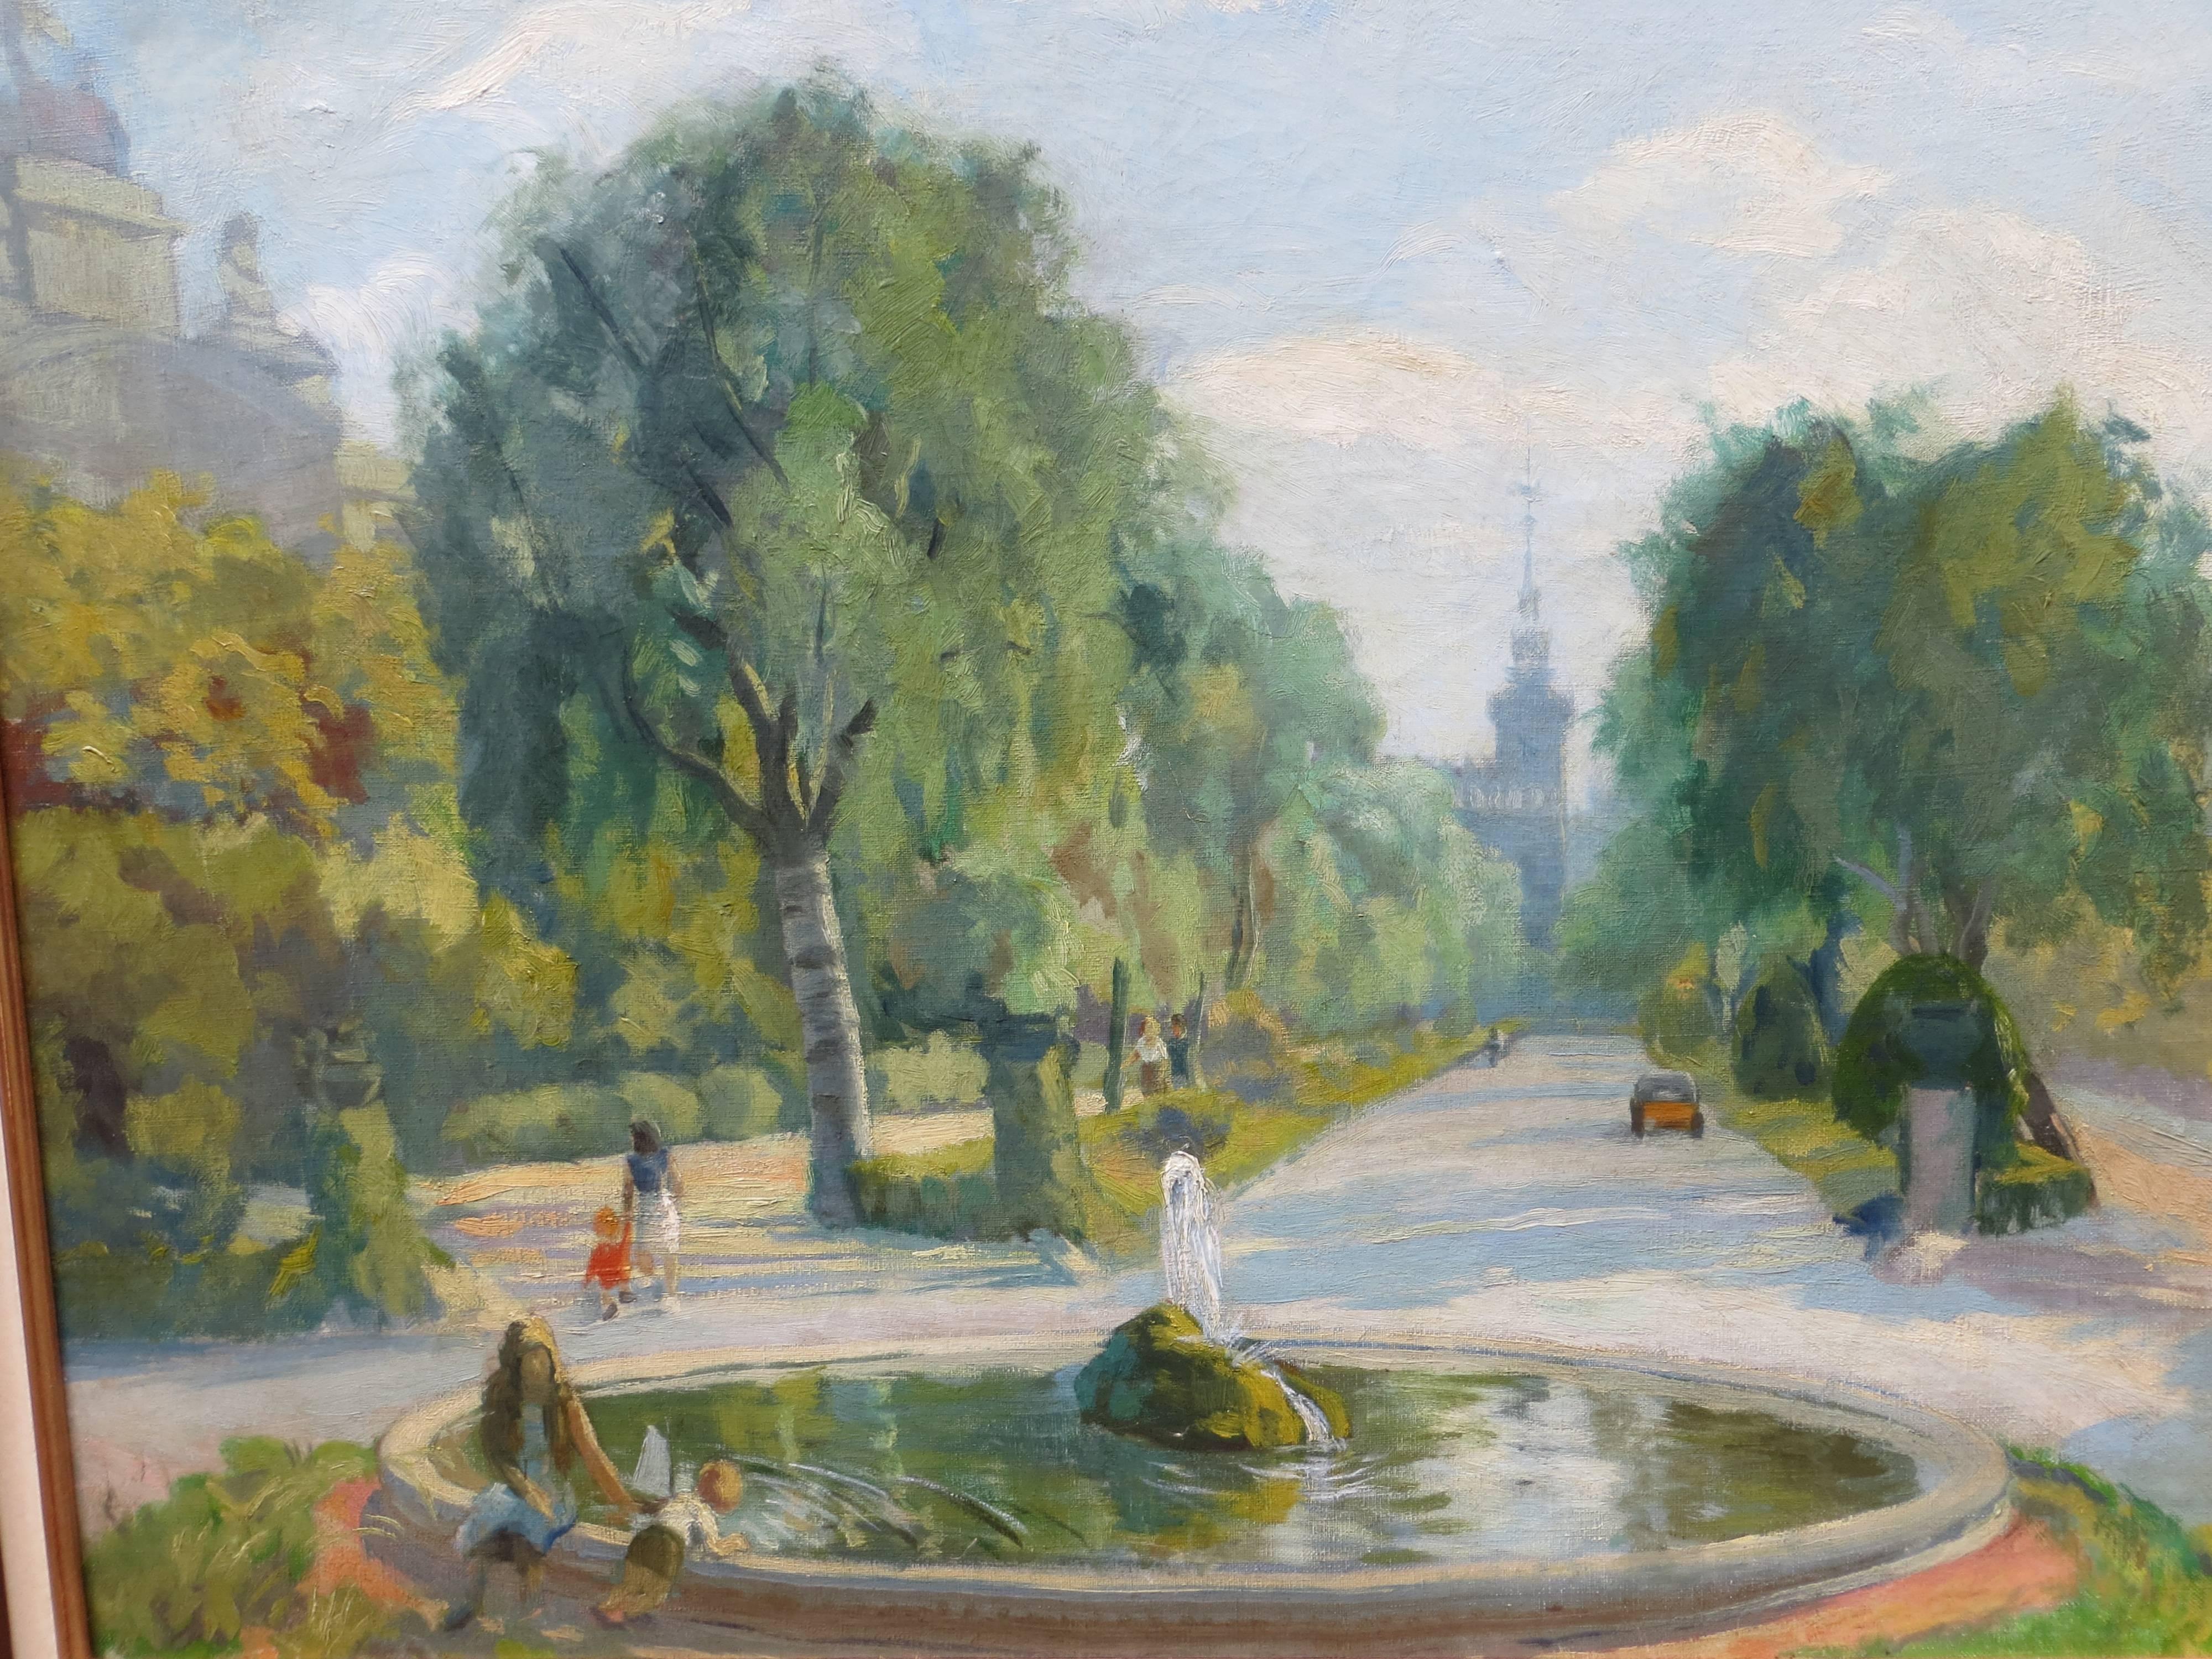 Park in PARIS - Post-Impressionist Painting by Unknown